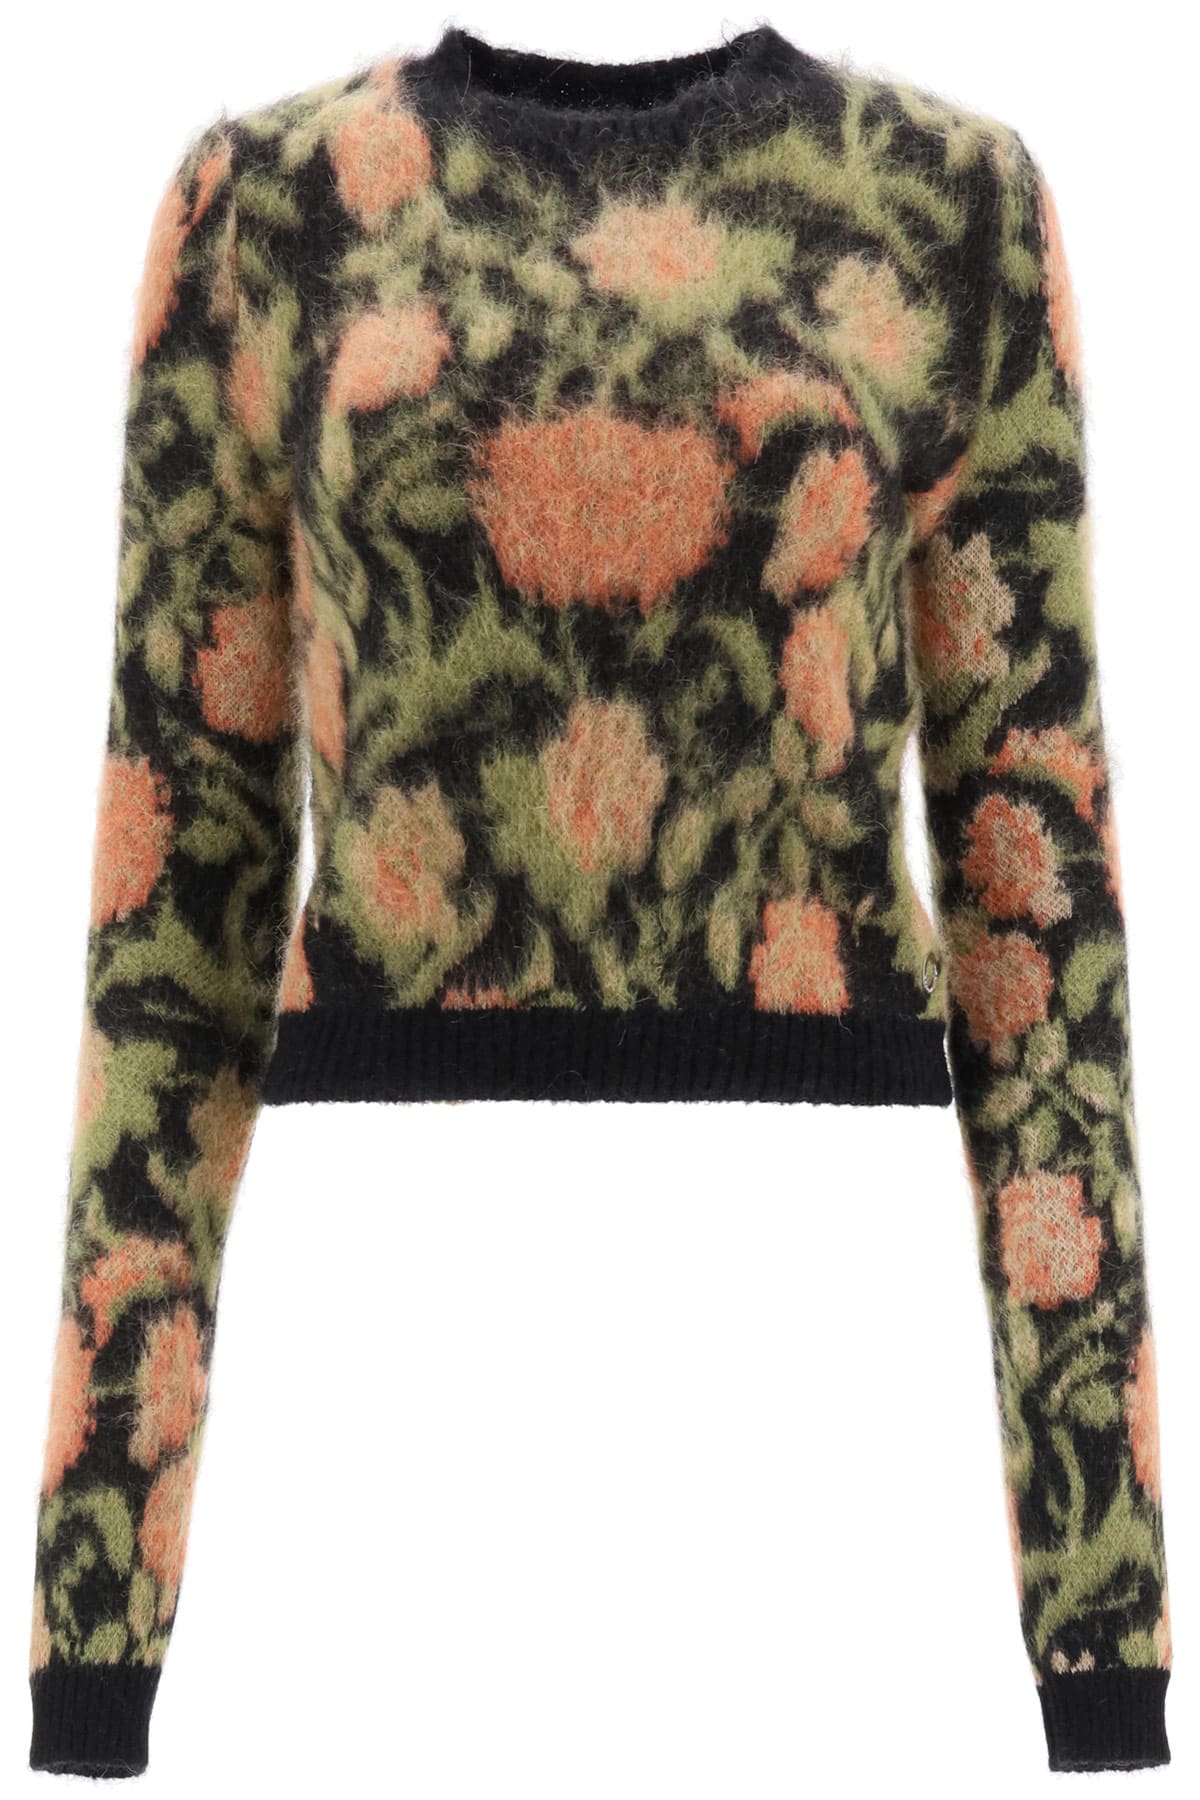 Paco Rabanne Cropped Floral Sweater